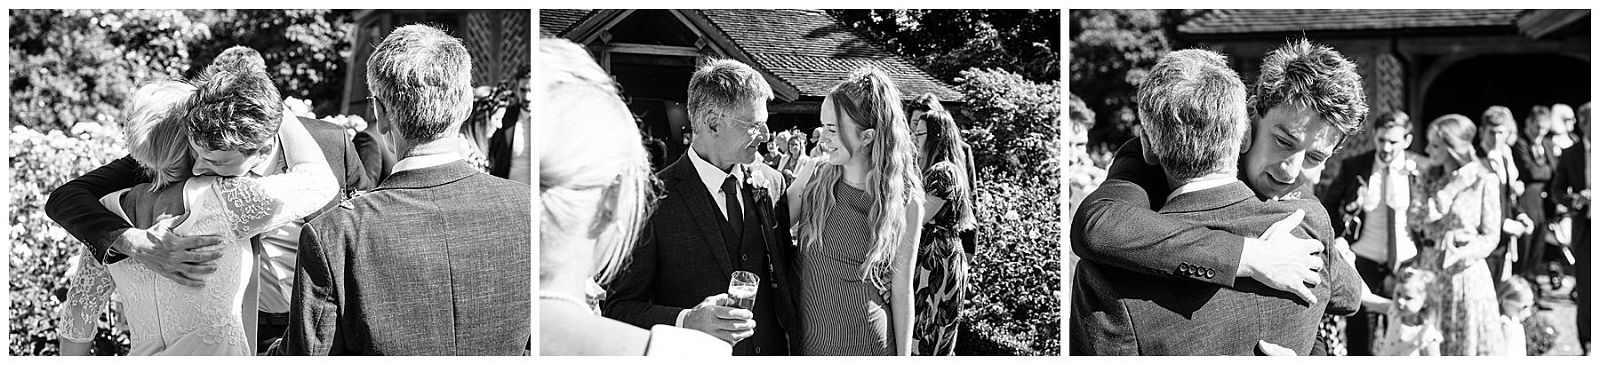 Candid photographs capturing the guests greeting the newlyweds at Goldstone Hall in Shropshire by Documentary Wedding Photographer Stuart James